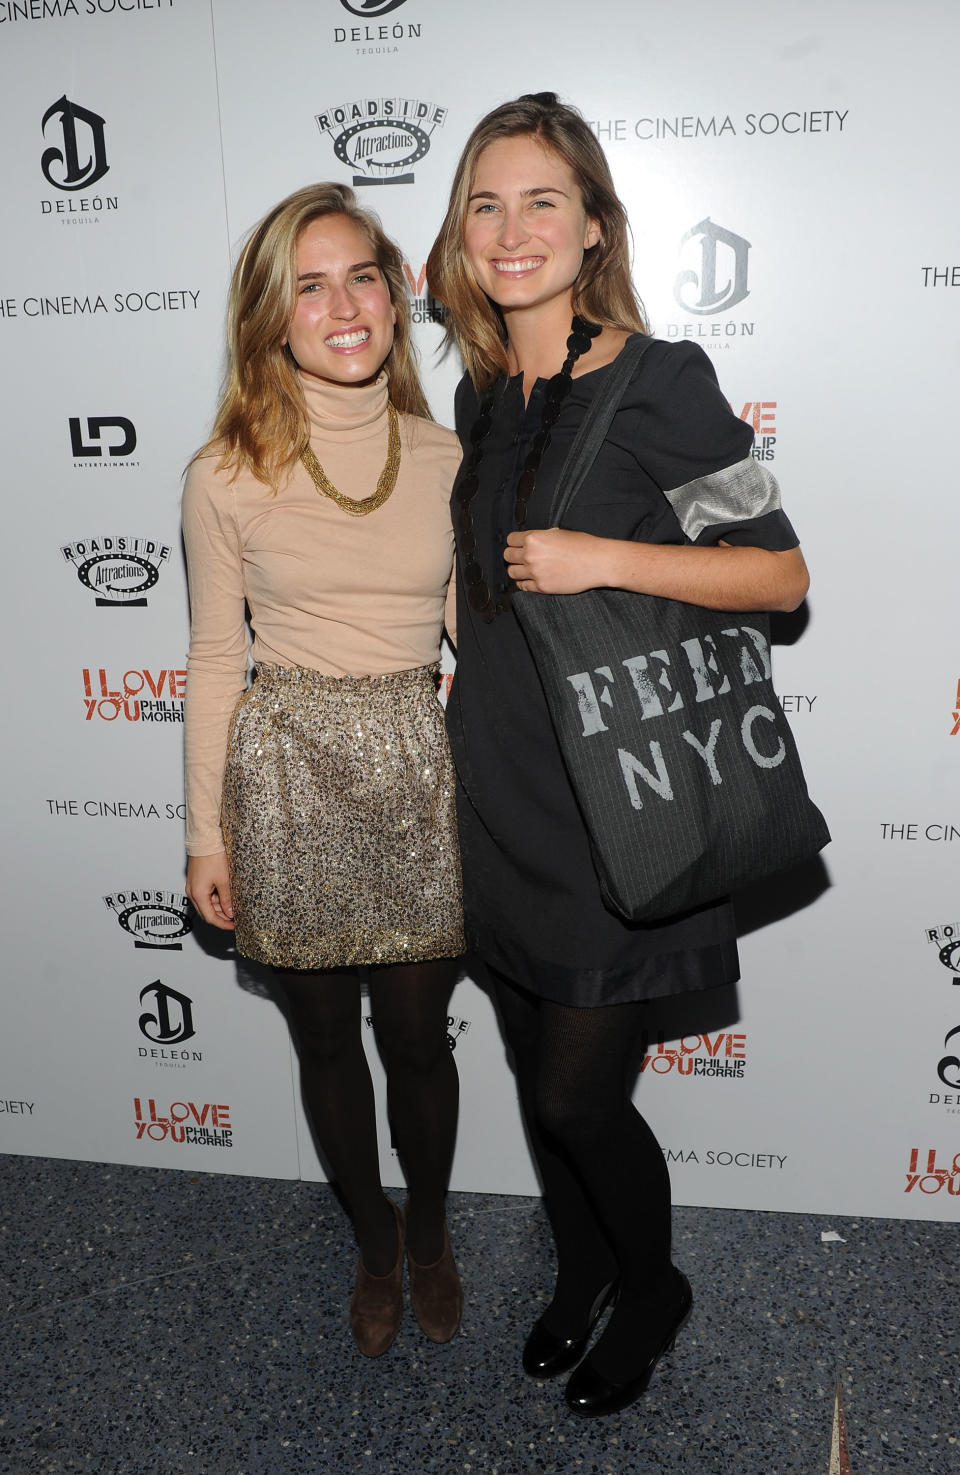 Ashley Bush (L) and Lauren Bush attend a special screening of 'I Love You Phillip Morris' hosted by The Cinema Society and DeLeon Tequila at the School of Visual Arts Theater on November 22, 2010 in New York City.  (Photo by Stephen Lovekin/Getty Images)  -- Daughter of Neil Bush & Sharon Smith (Bush's first wife)